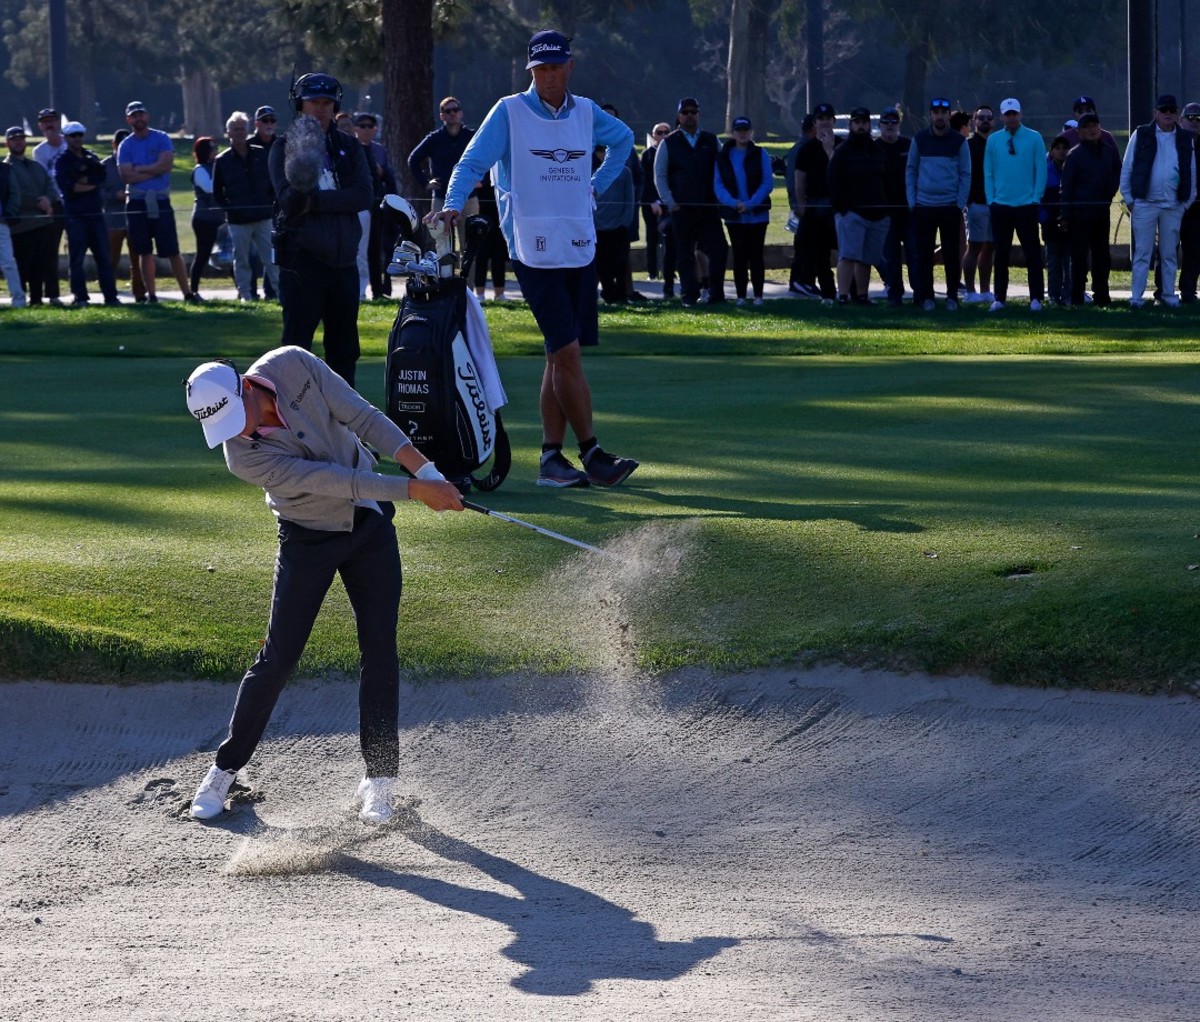 Justin Thomas plays from the bunker on the second hole during the final round of the Genesis Invitational at Riviera Country Club on February 19, 2023.